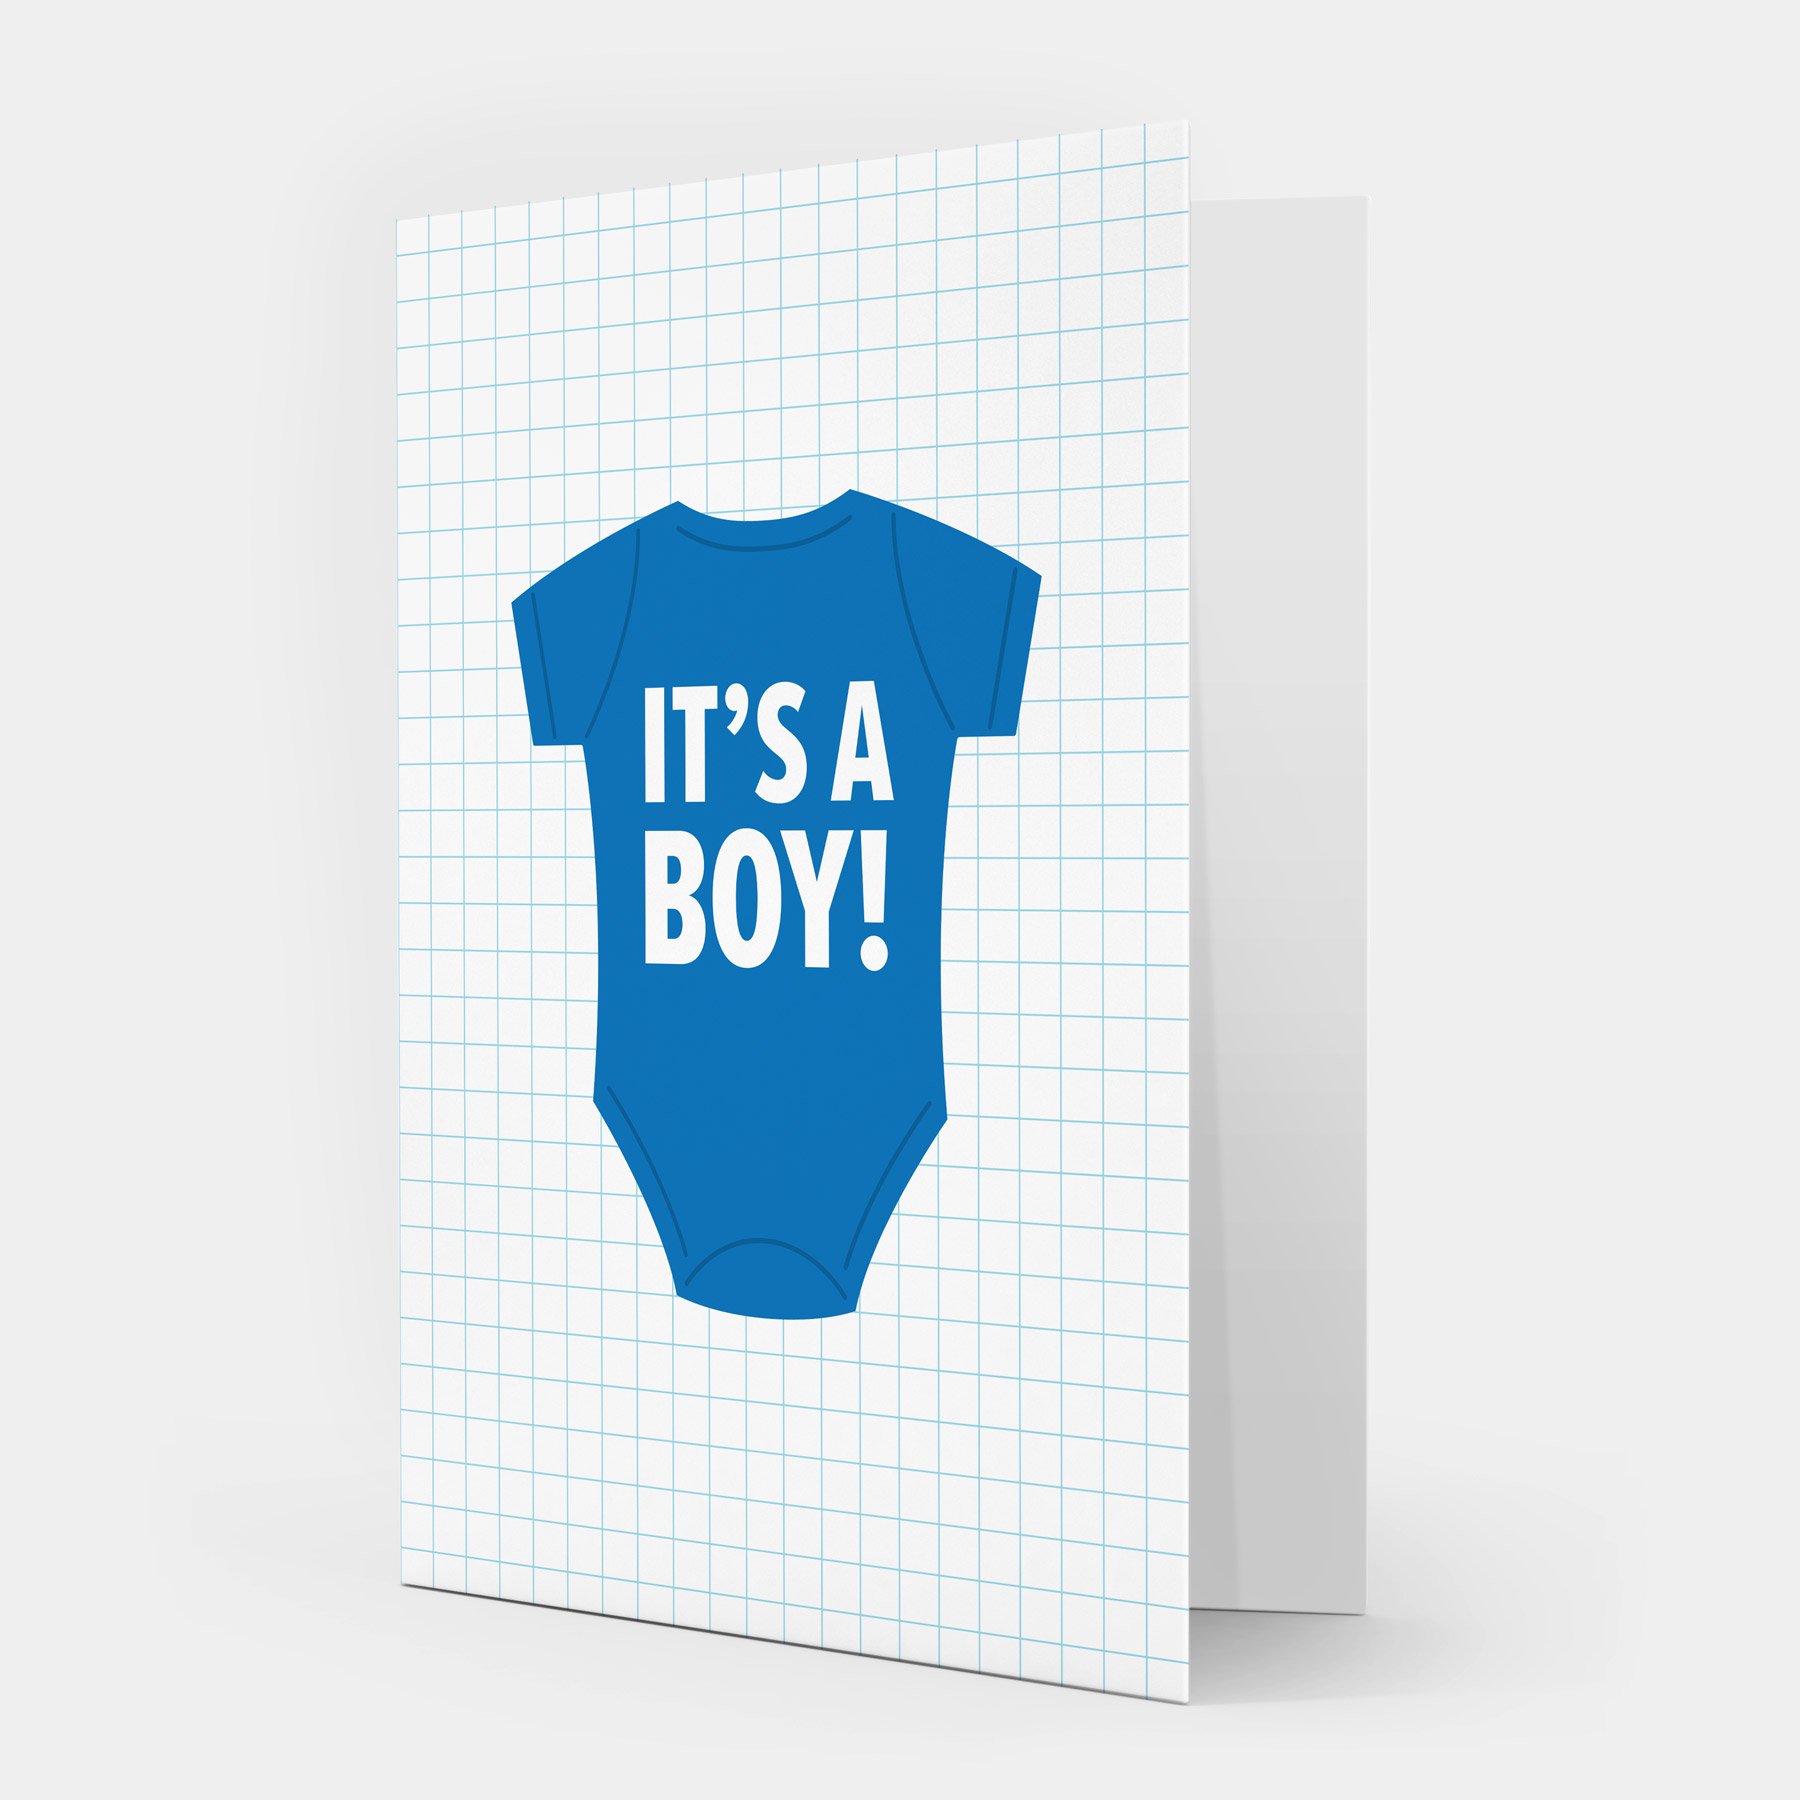 It's a Boy! New Baby Greetings Card